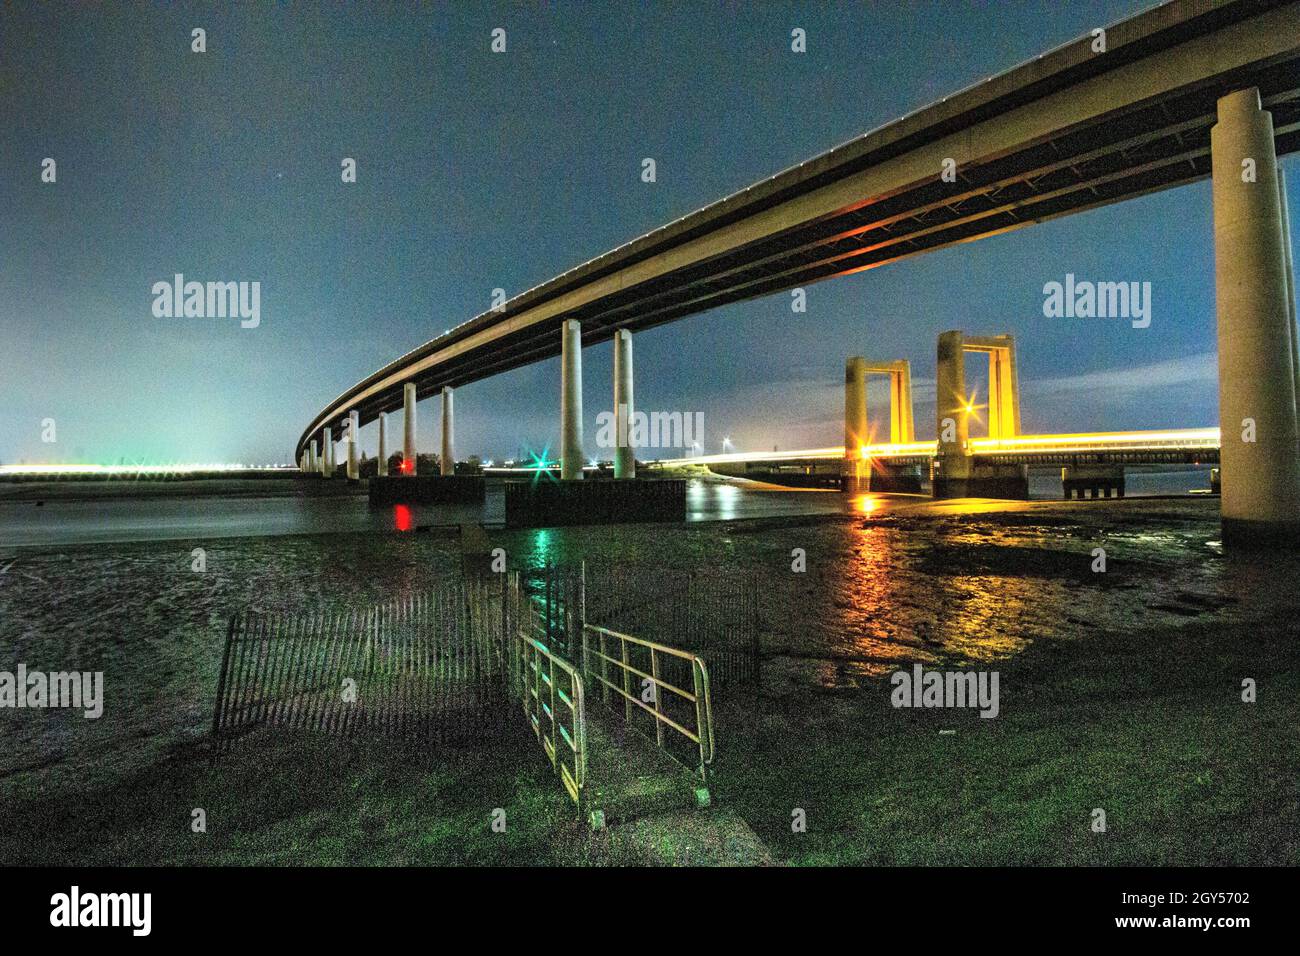 pictures of kingsferry bridge & cross the link from sheerness to mainland Stock Photo